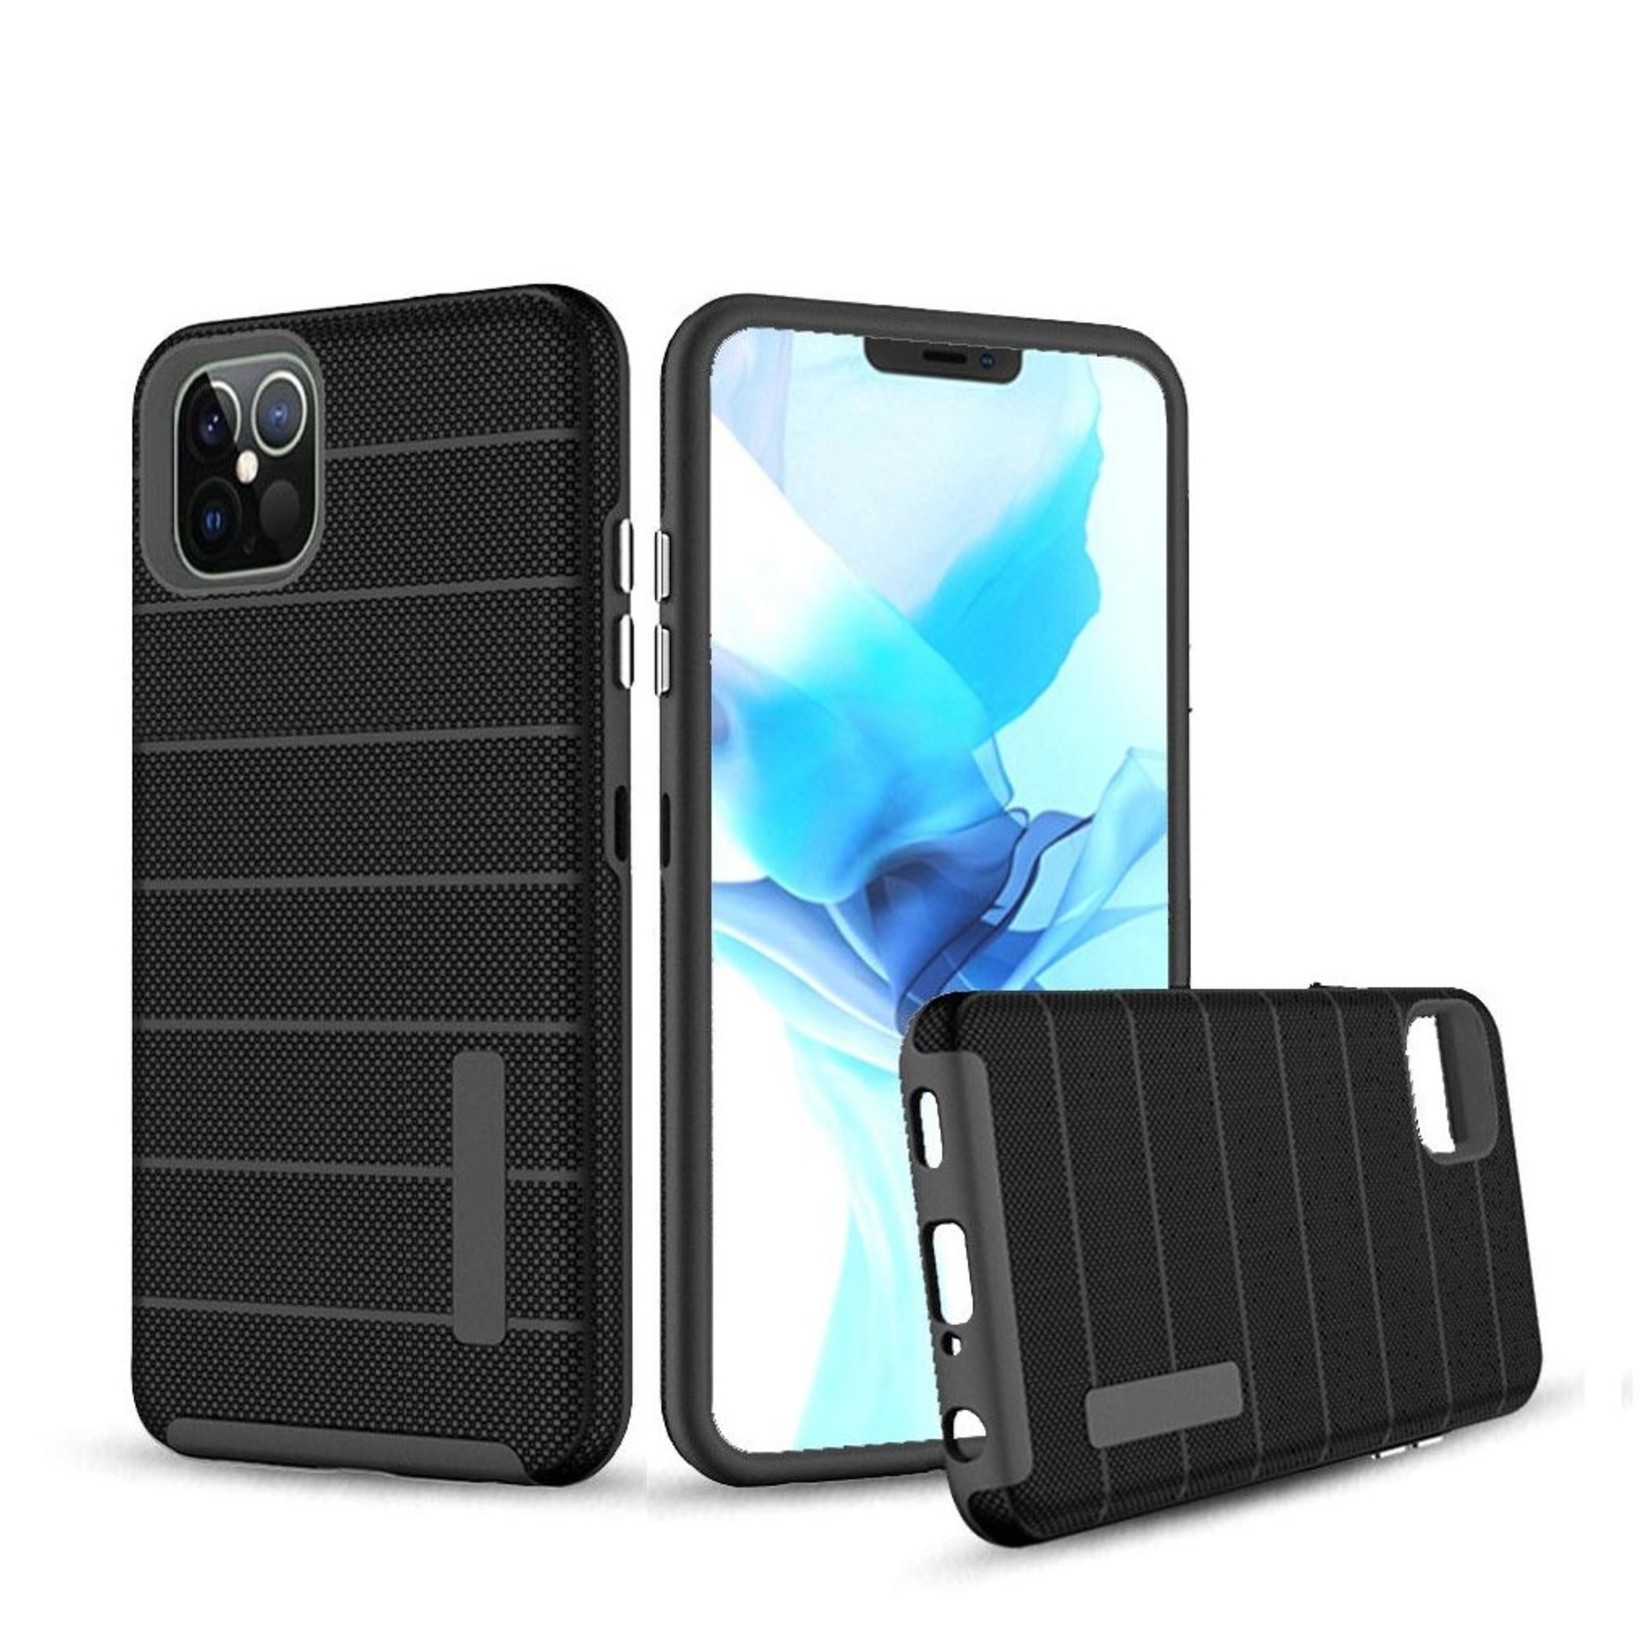 PC TPU Shock Proof Hybrid case with Stripes Design for iPhone 12 Pro Max